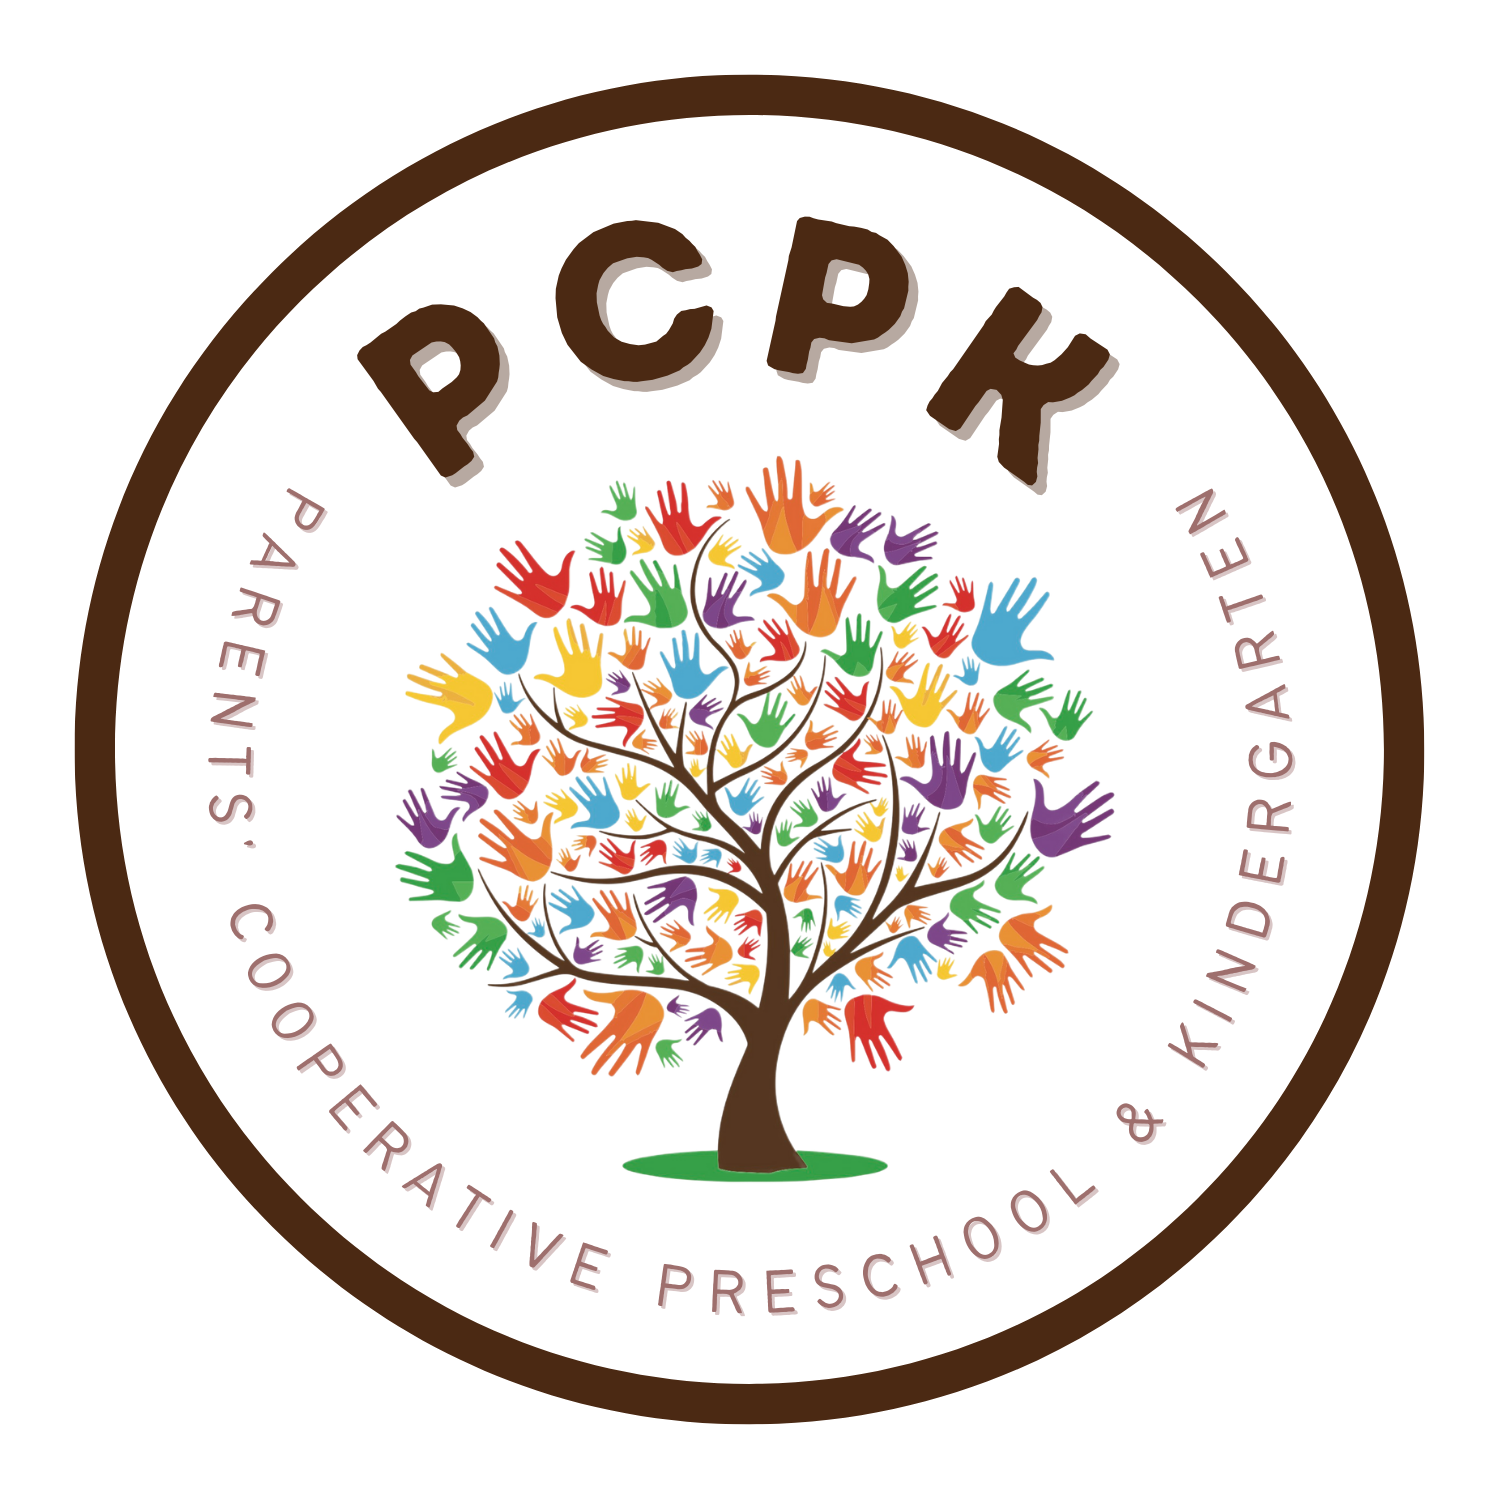 Parents' Cooperative Preschool and Kindergarten logo featuring a tree with colorful children's handprints as leaves